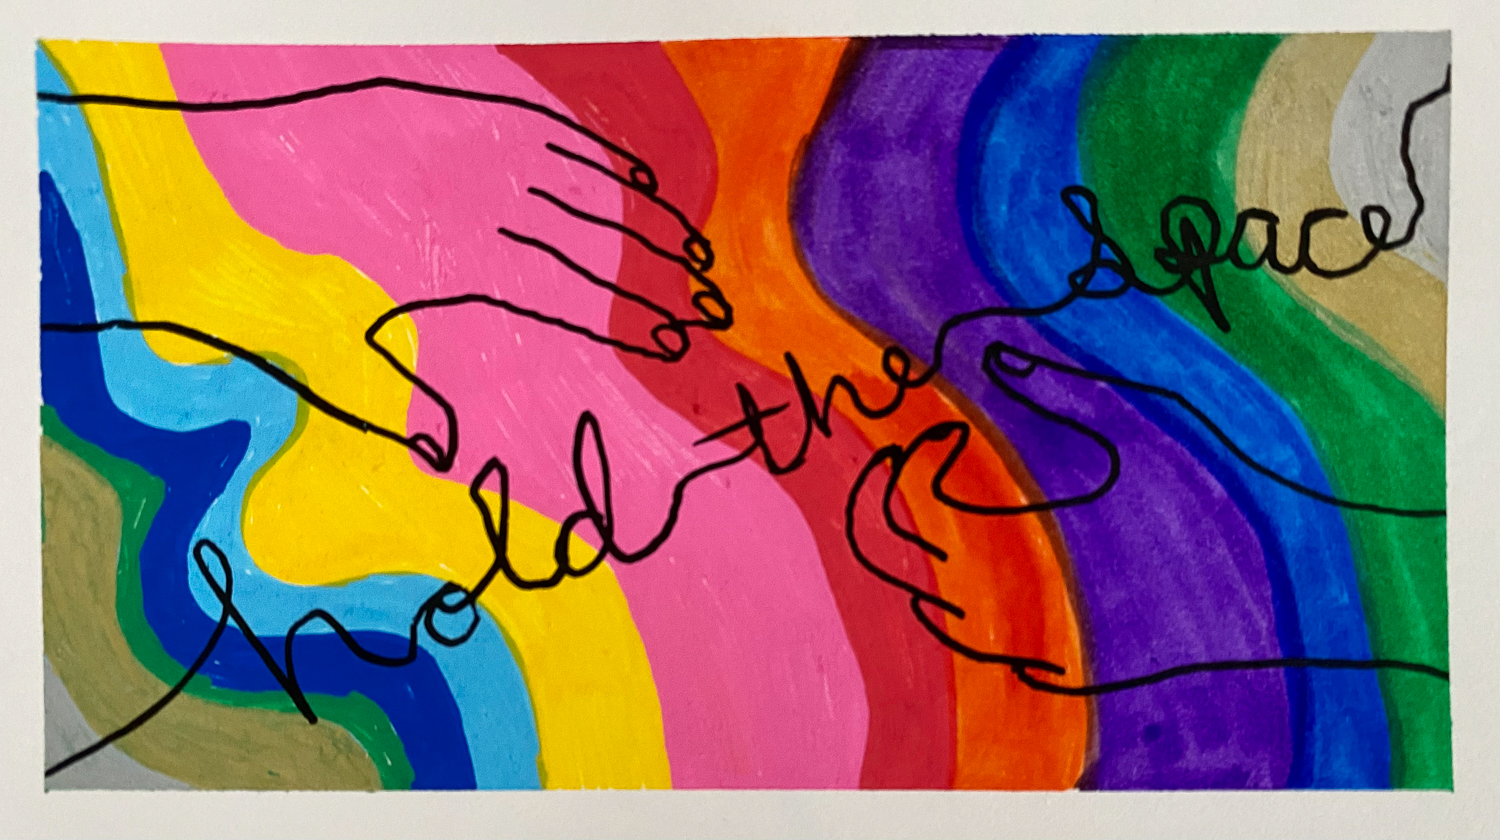 Artwork - rainbow colors with words "Hold the space"